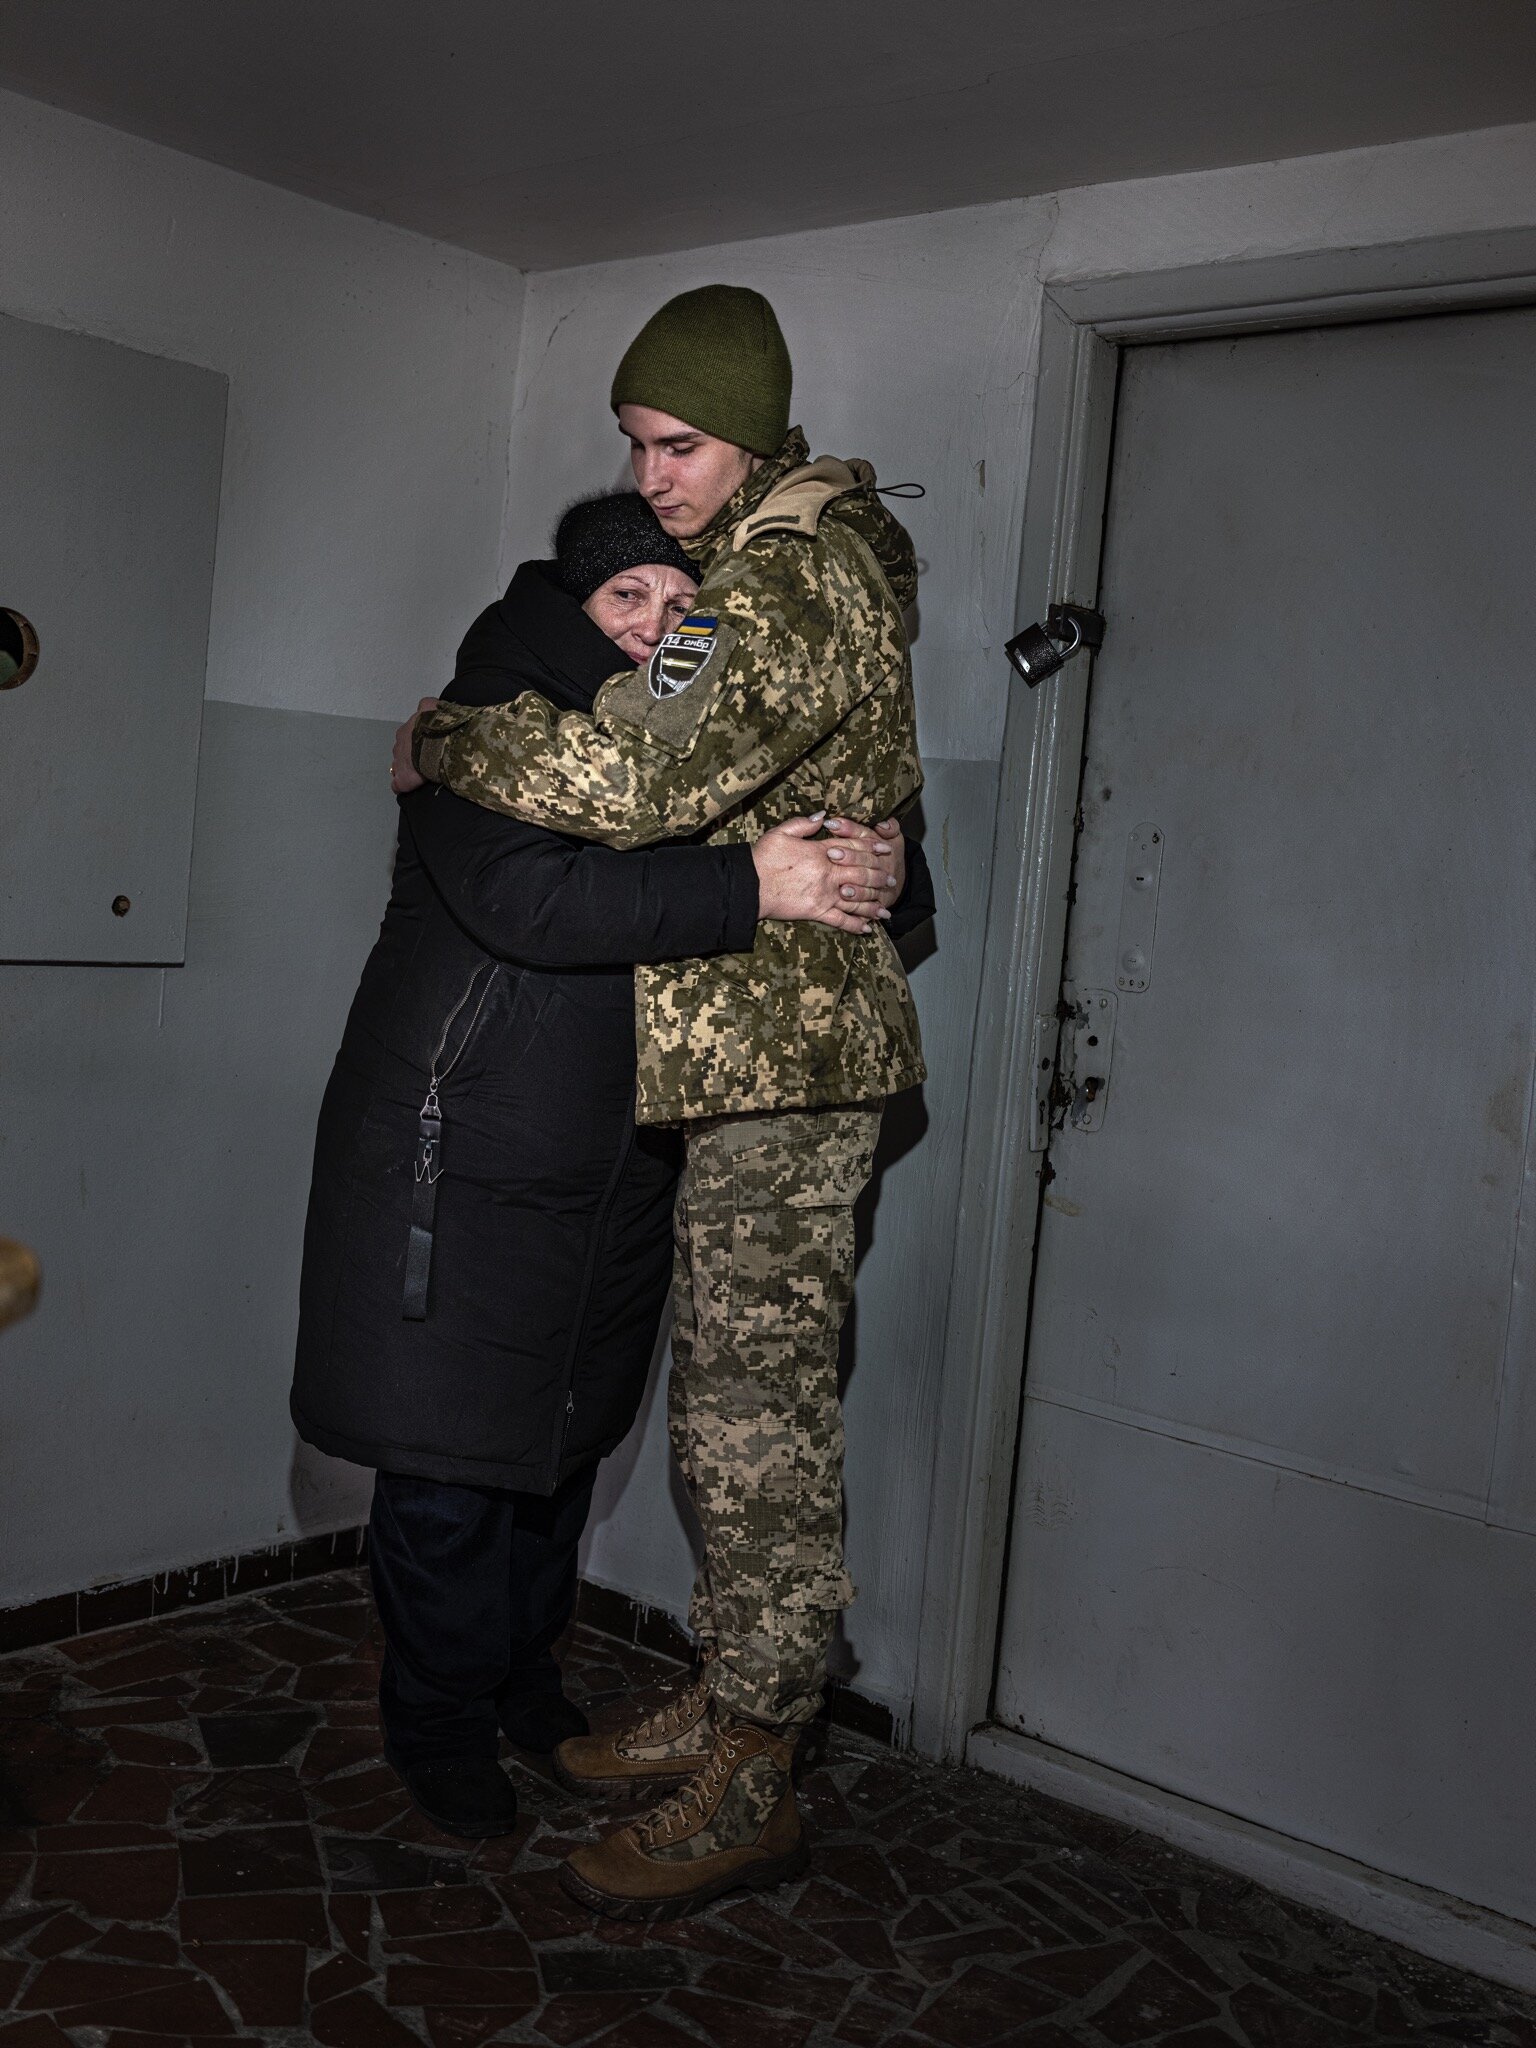 19mag-Ukraine-14-mobileMasterAt3x ‘I Live in Hell’: The Psychic Wounds of Ukraine’s Soldiers